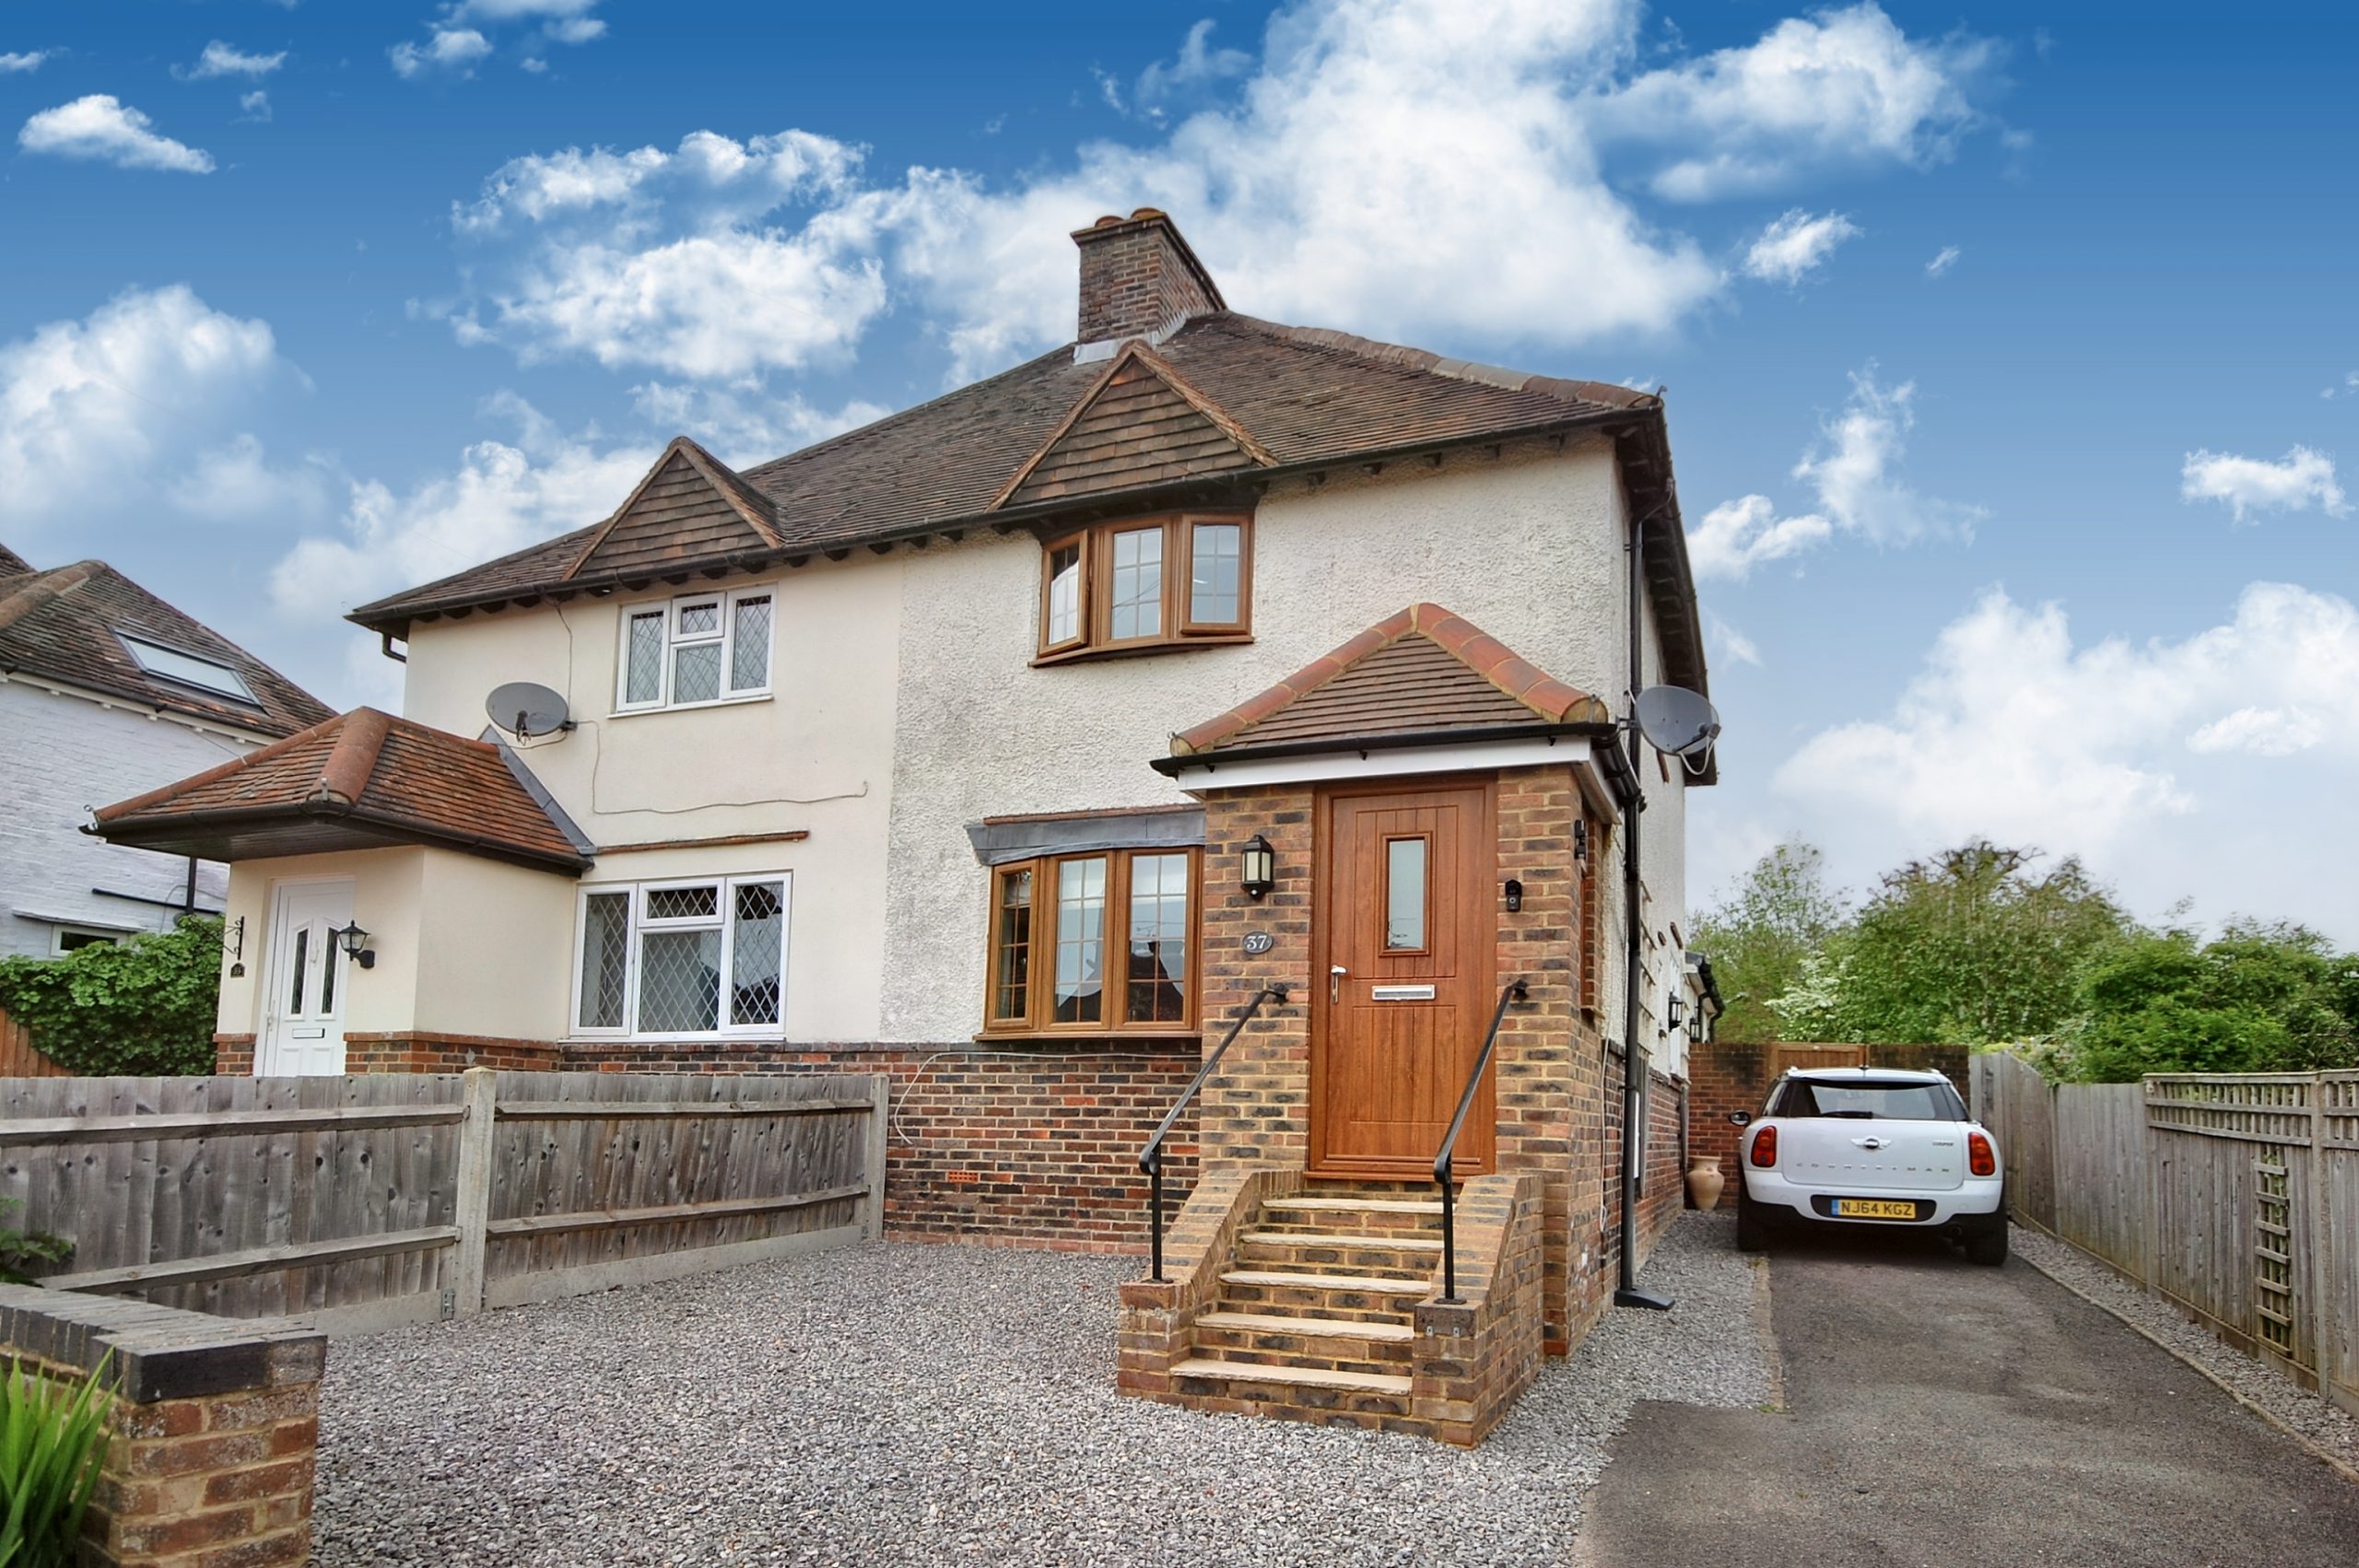 Multiple Offers On This Property In Farnham